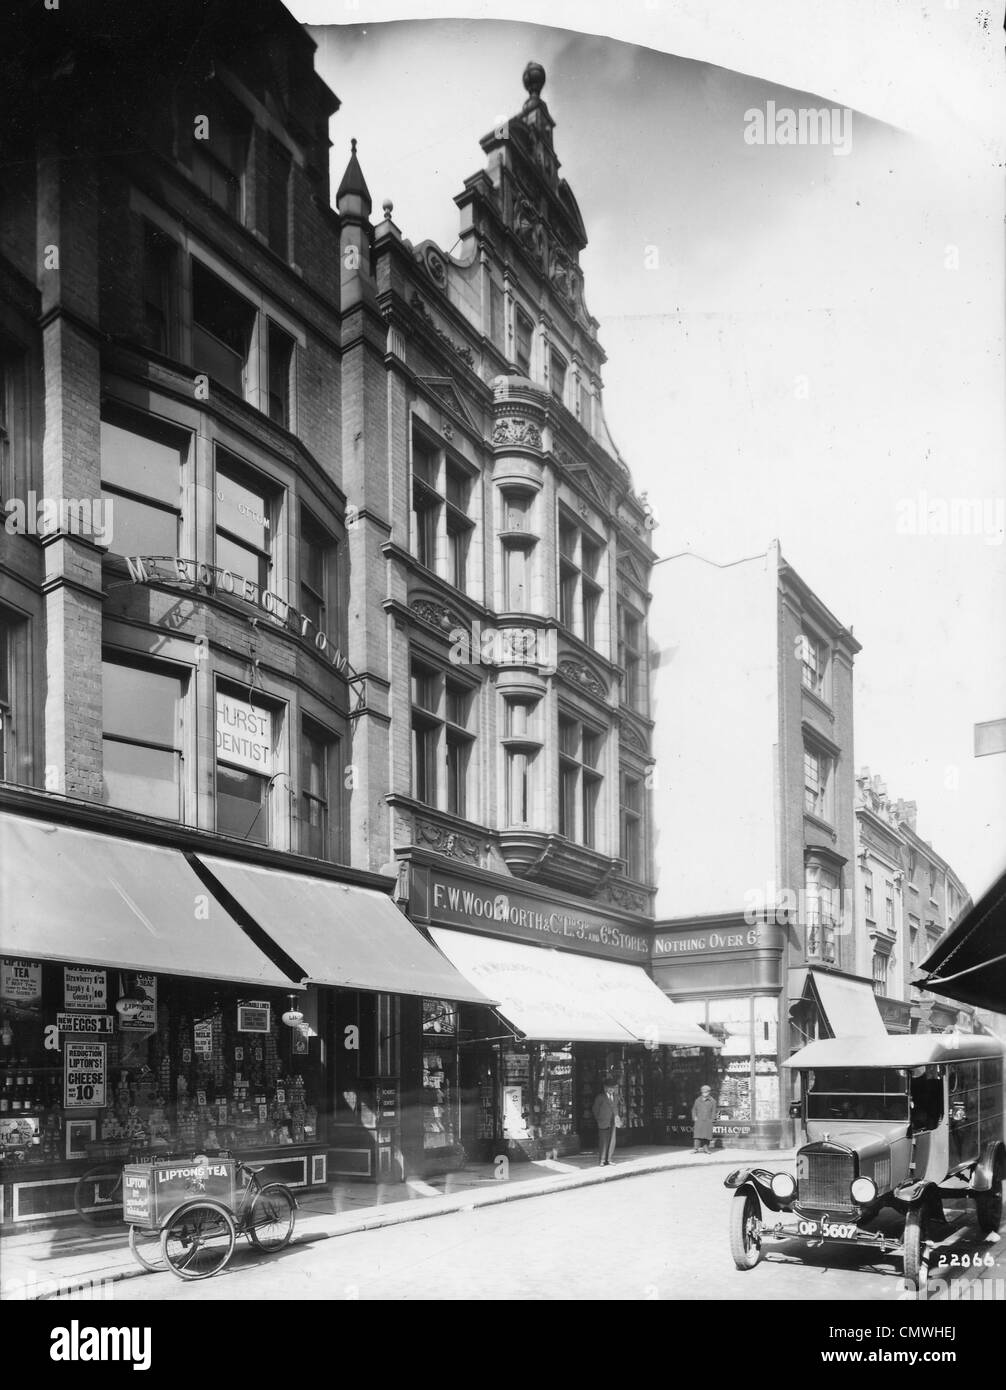 Dudley Street, Wolverhampton, Early 20th cent. Dudley Street showing the the premises of F. W. Woolworth & Company Ltd. These Stock Photo